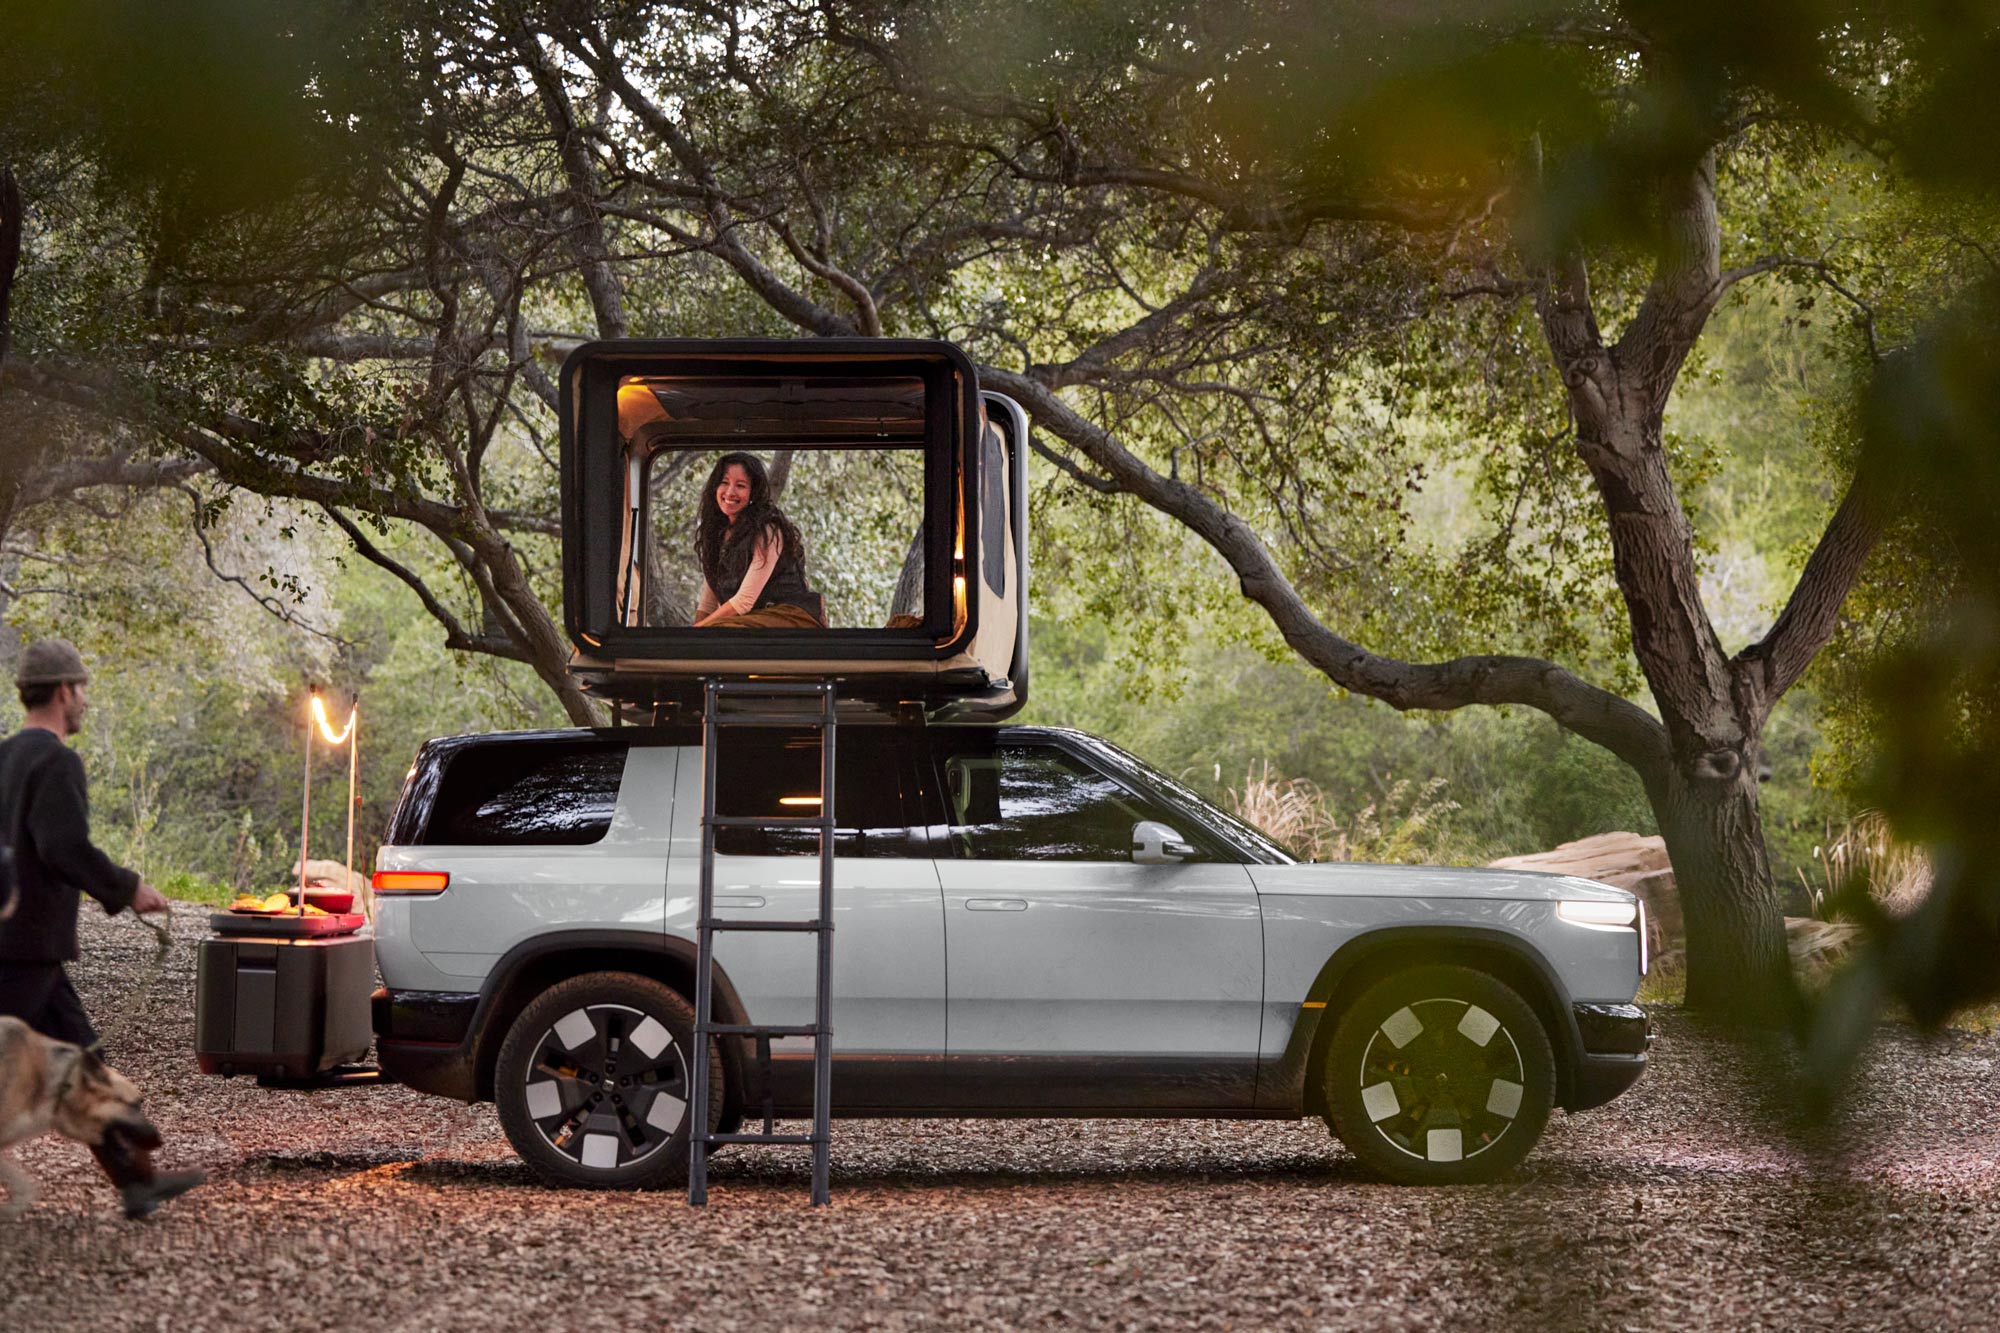 2026 Rivian R2 with rooftop tent set up and a person inside.